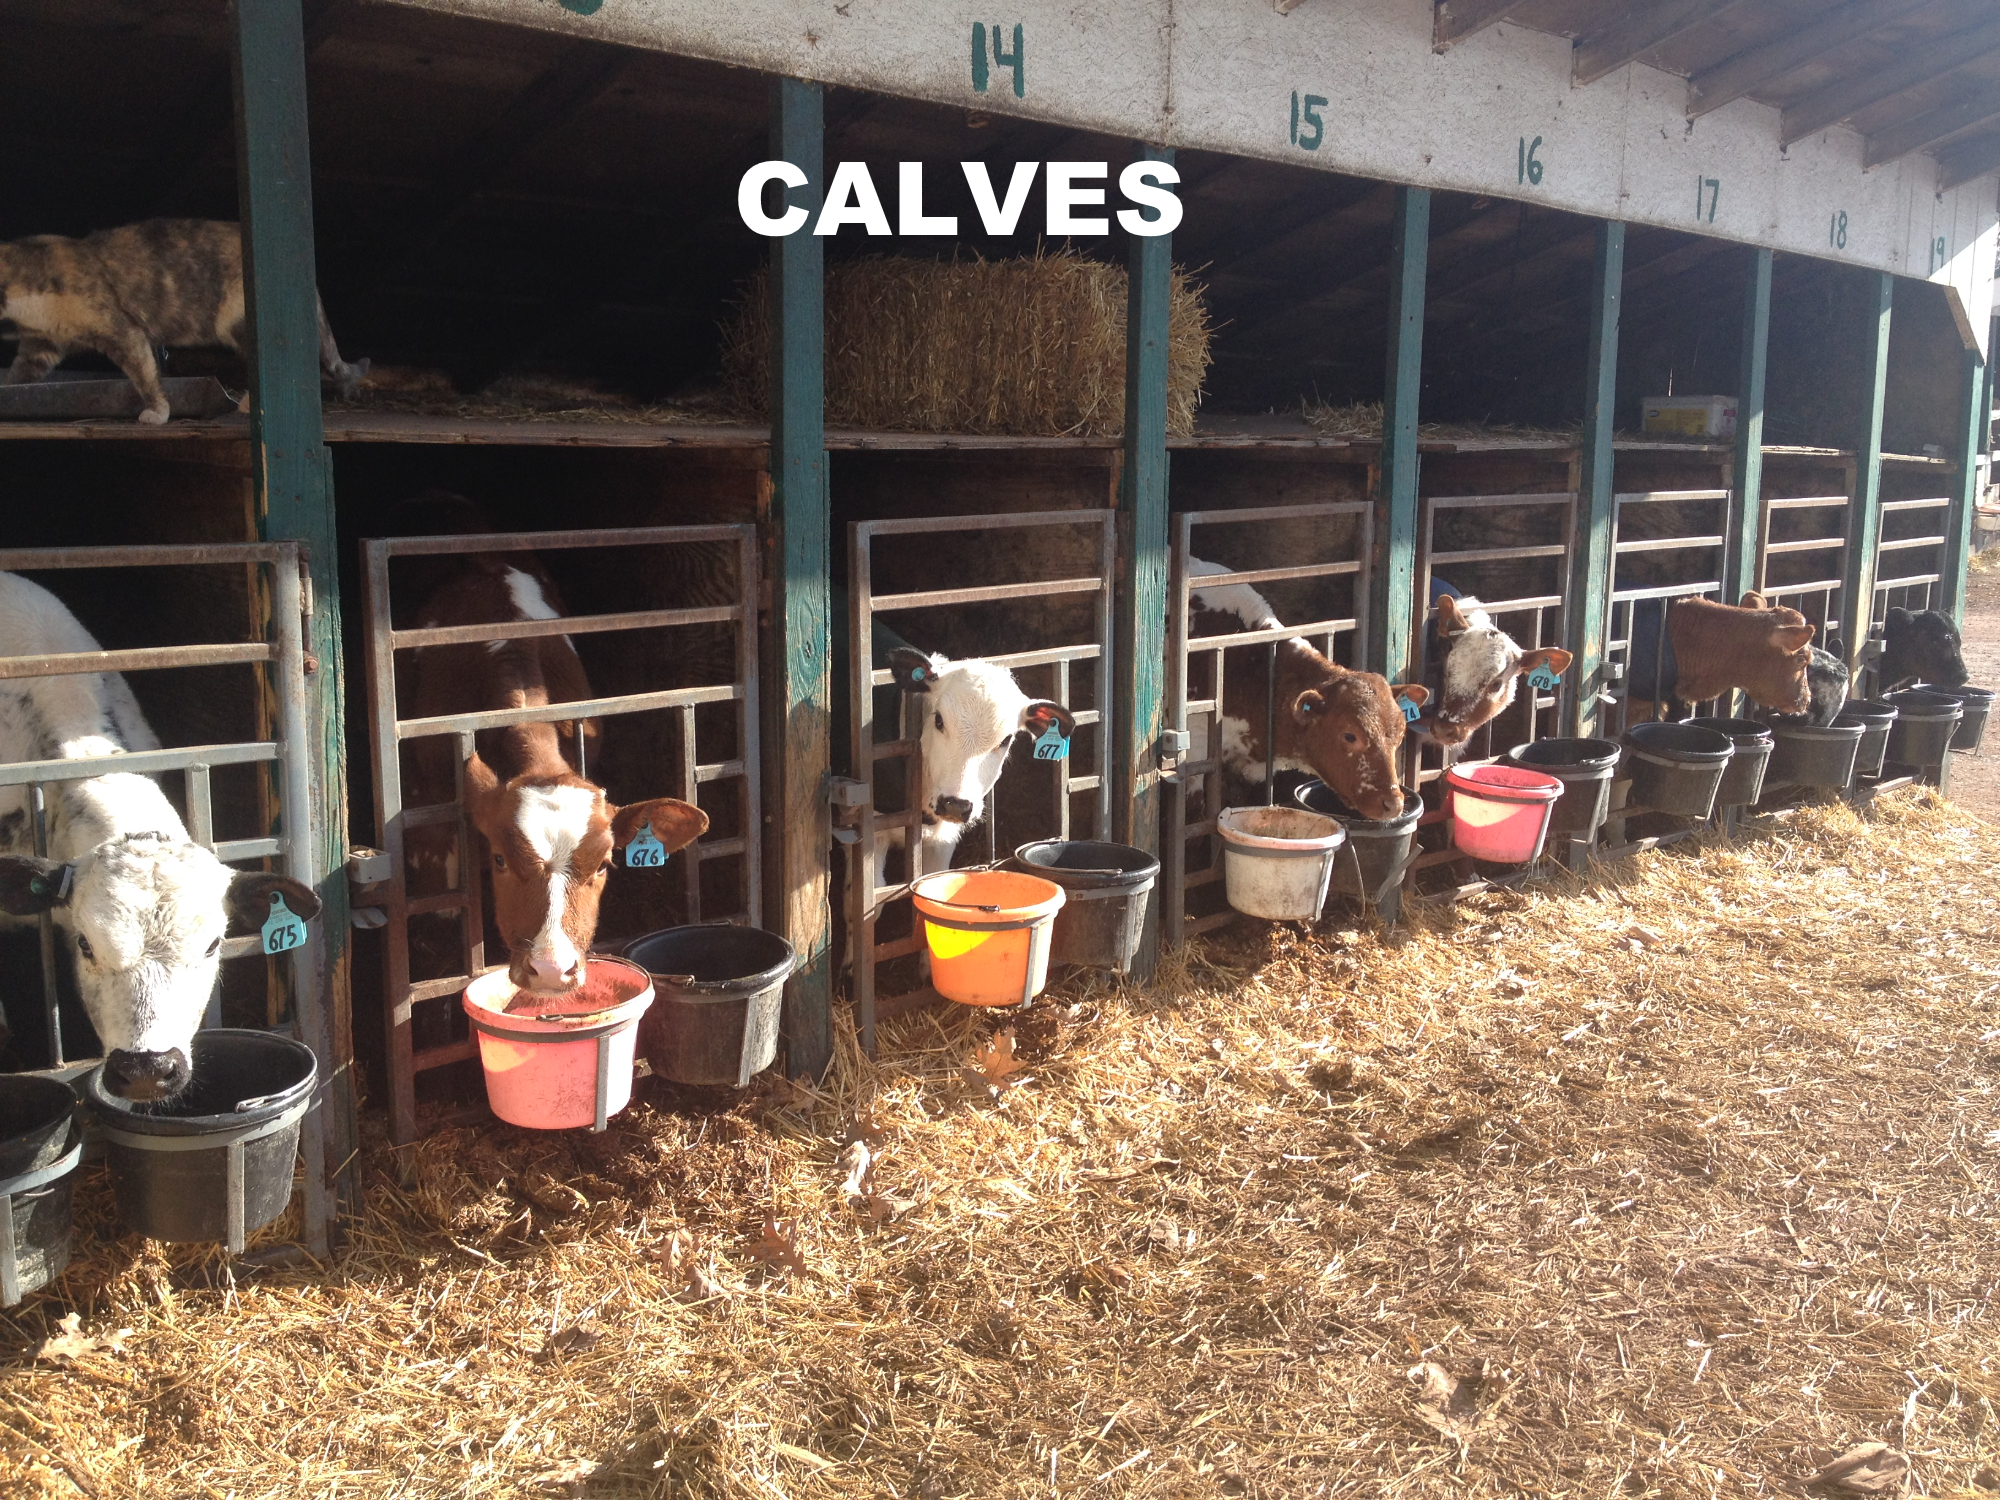 Where can you sell calves?